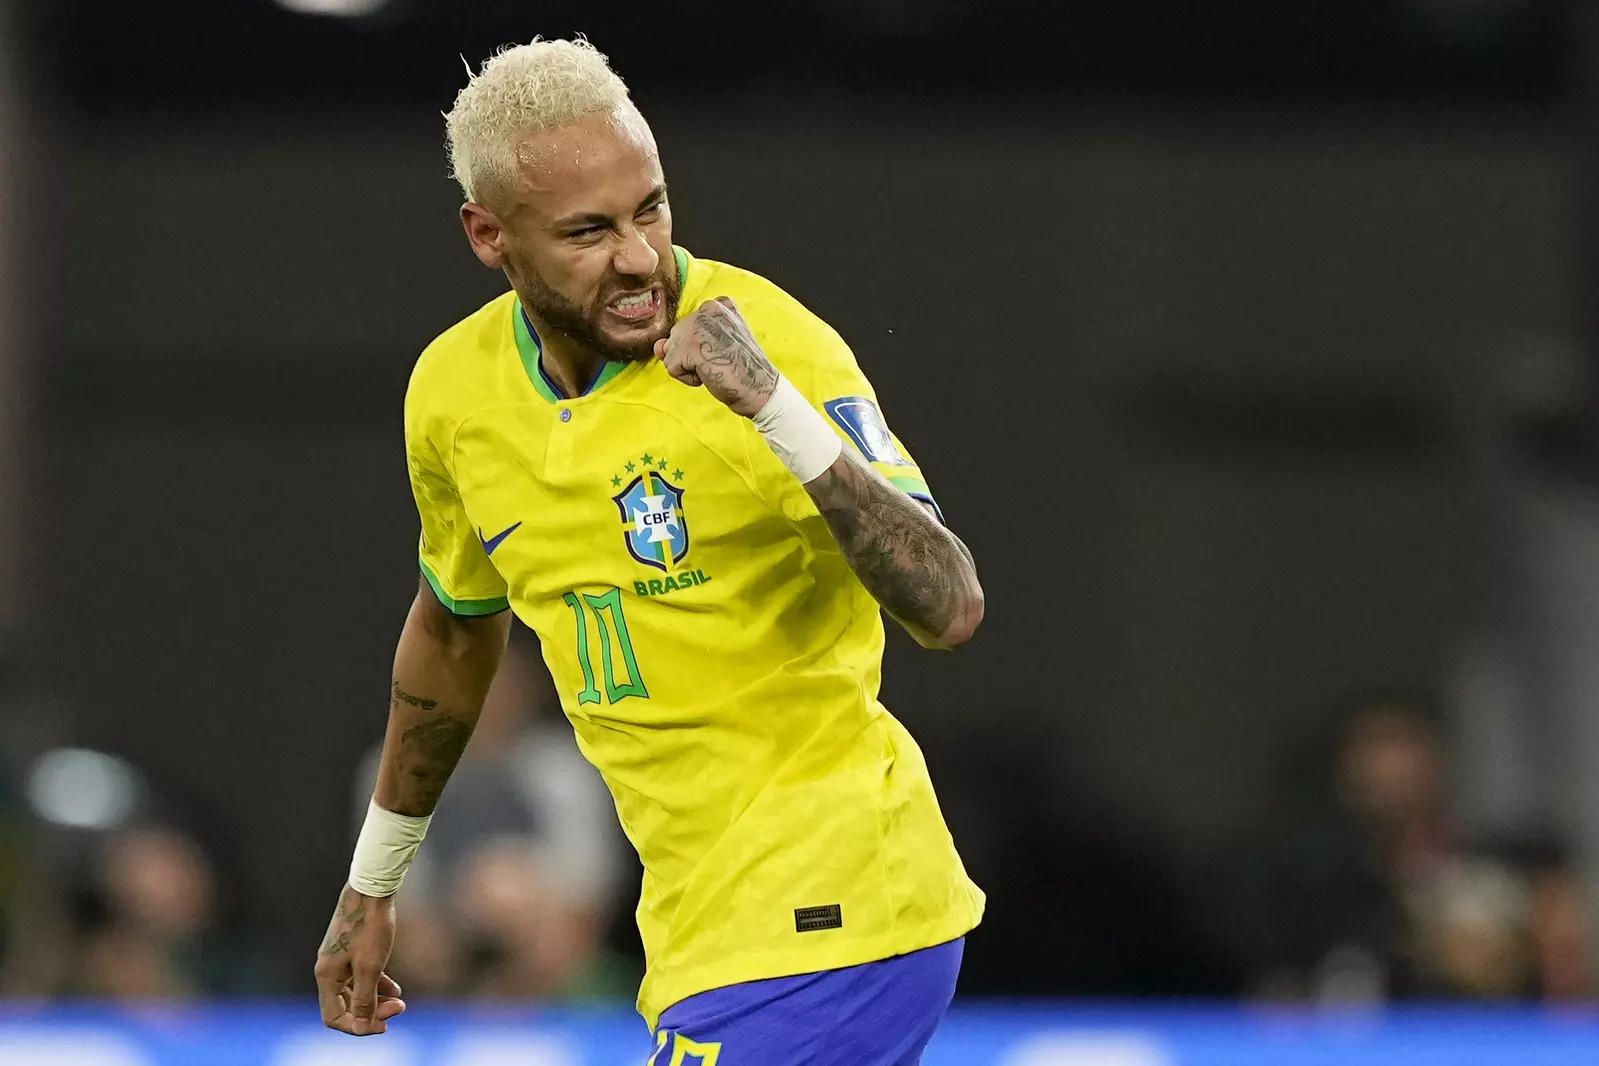 Neymar speaks out about his injury and Brazil's advance to the quarterfinals of the 2022 World Cup